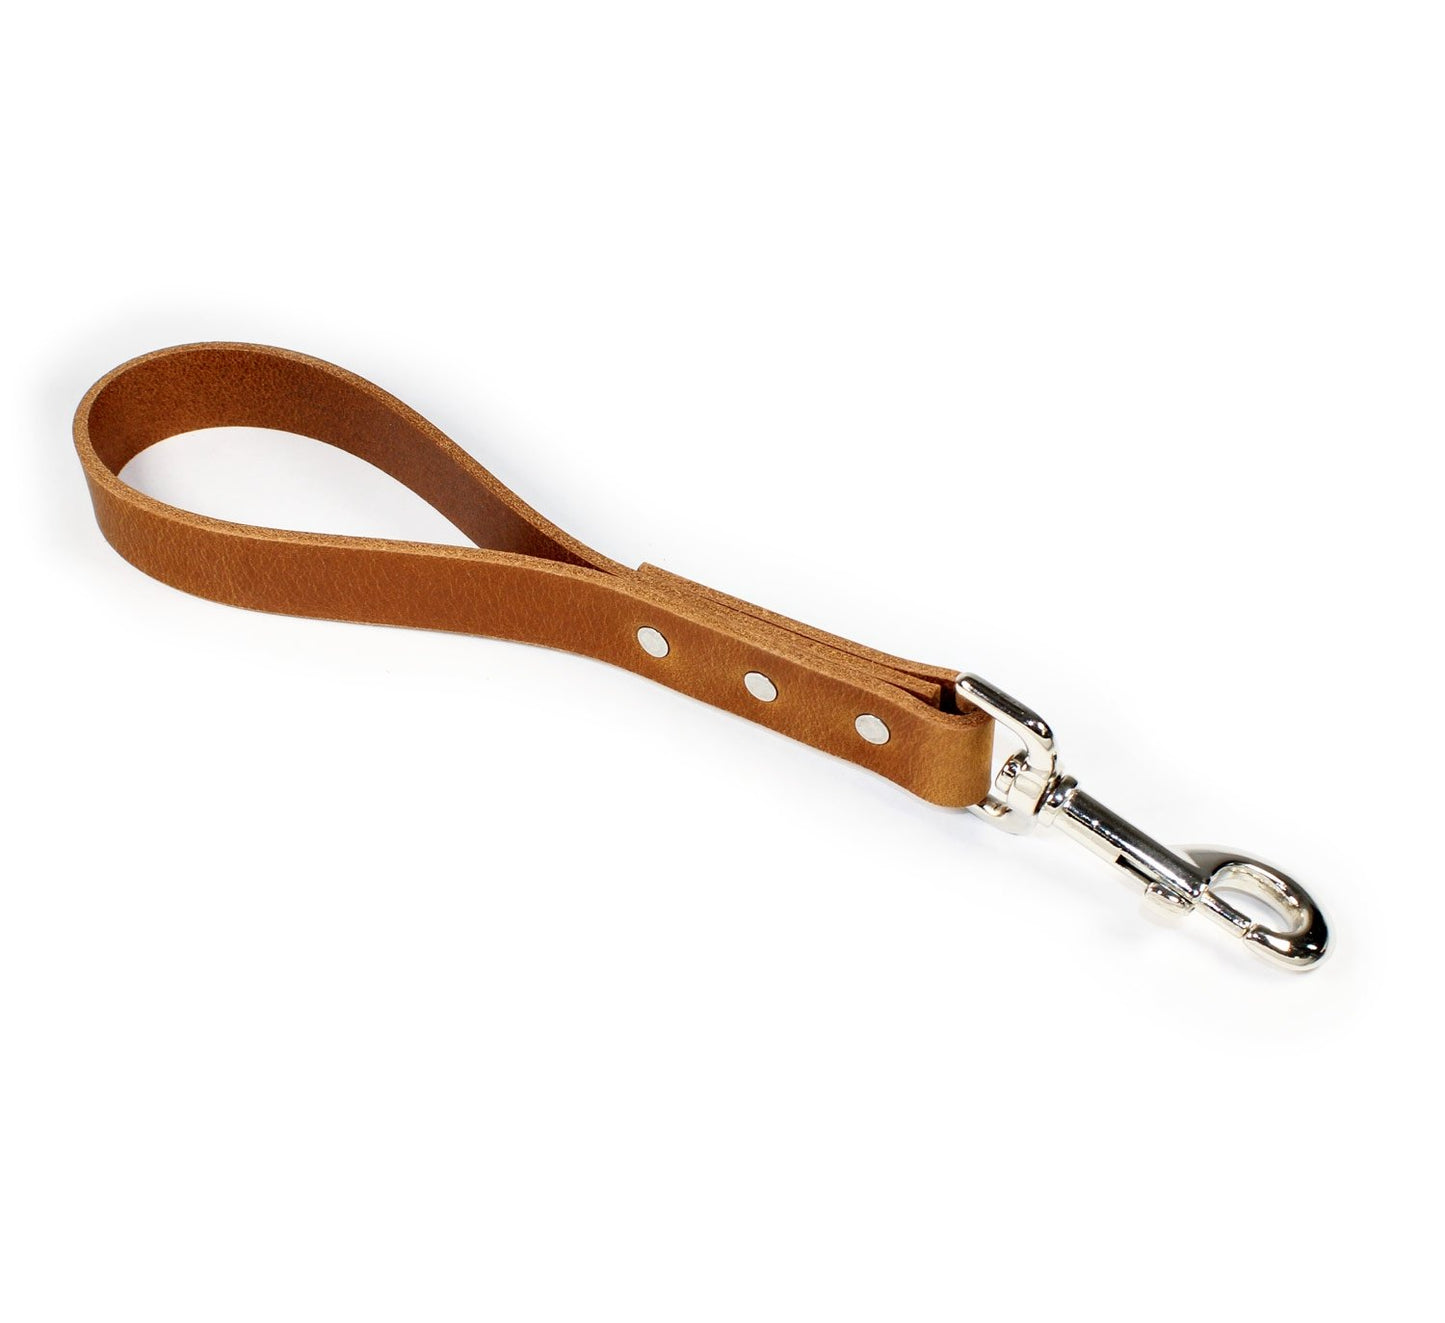 1' Thick Leather Traffic & Control Dog Leash